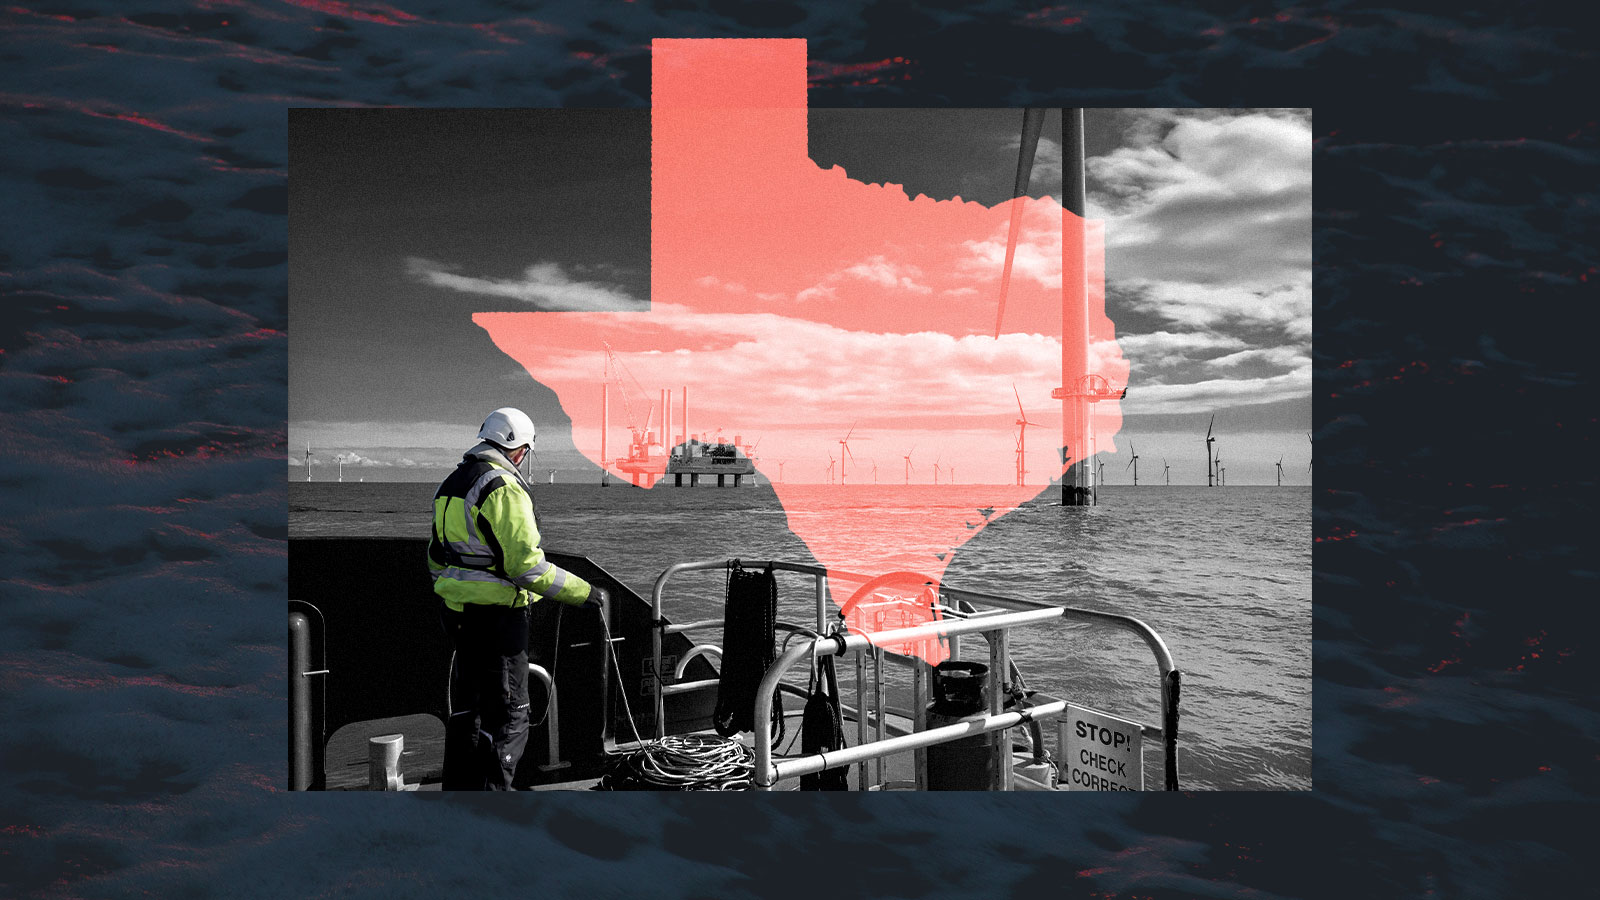 Collage: dark water with red light reflected on the ripples. A grayscale photo of offshore wind turbines and a worker looking at them is in the center; the worker is in color wearing a neon safety jacket. On top is a pink overlaid silhouette of the state of Texas.